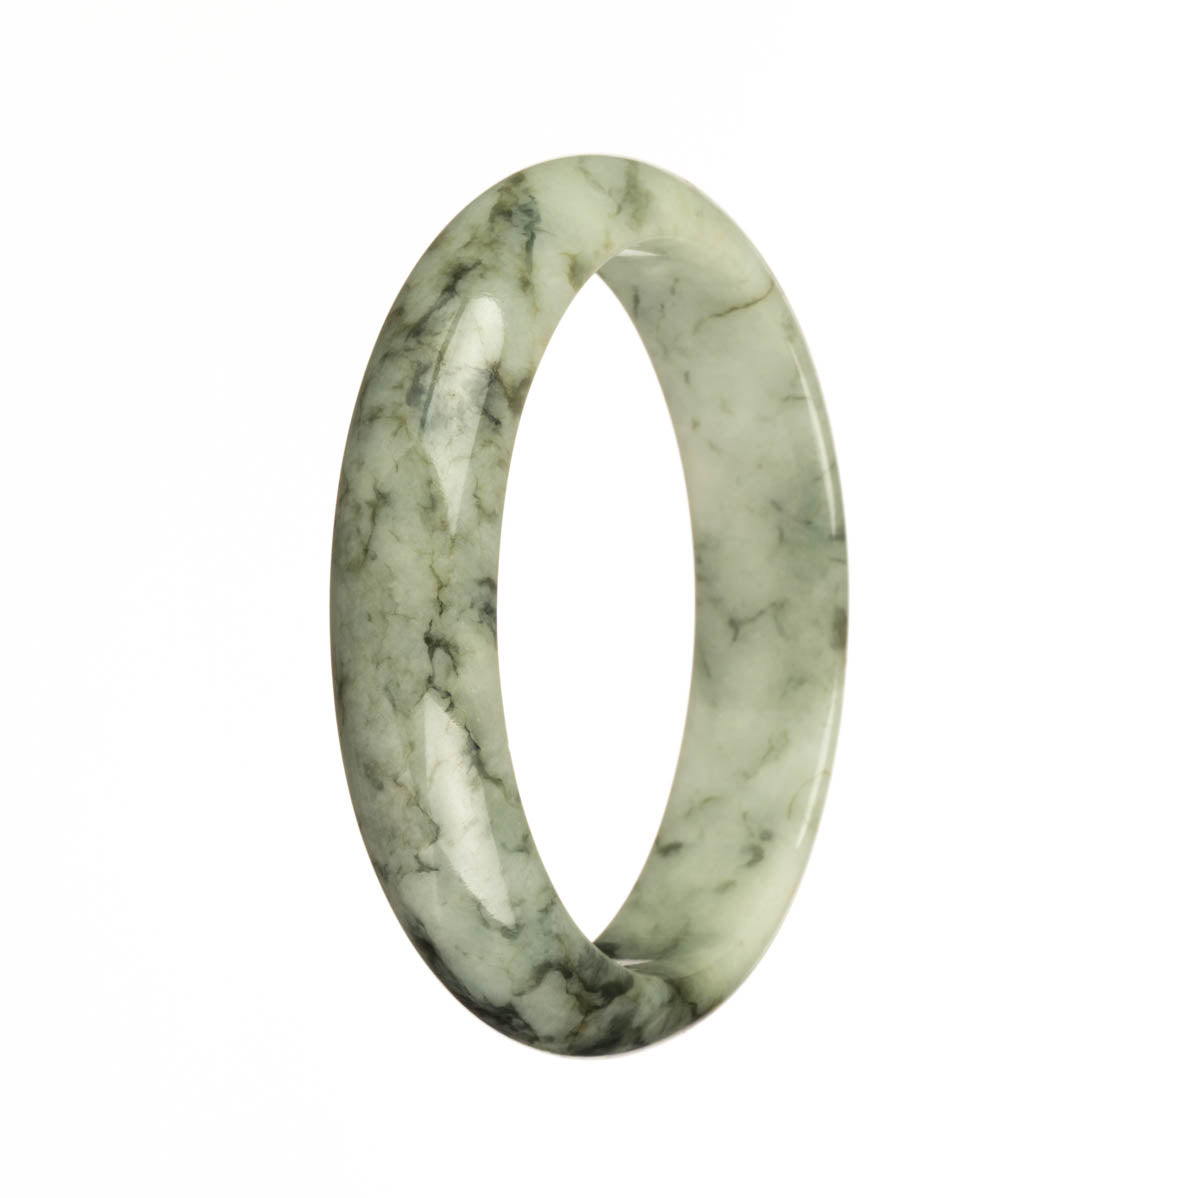 Certified Type A White with Dark Green Patterns Traditional Jade Bracelet - 58mm Half Moon